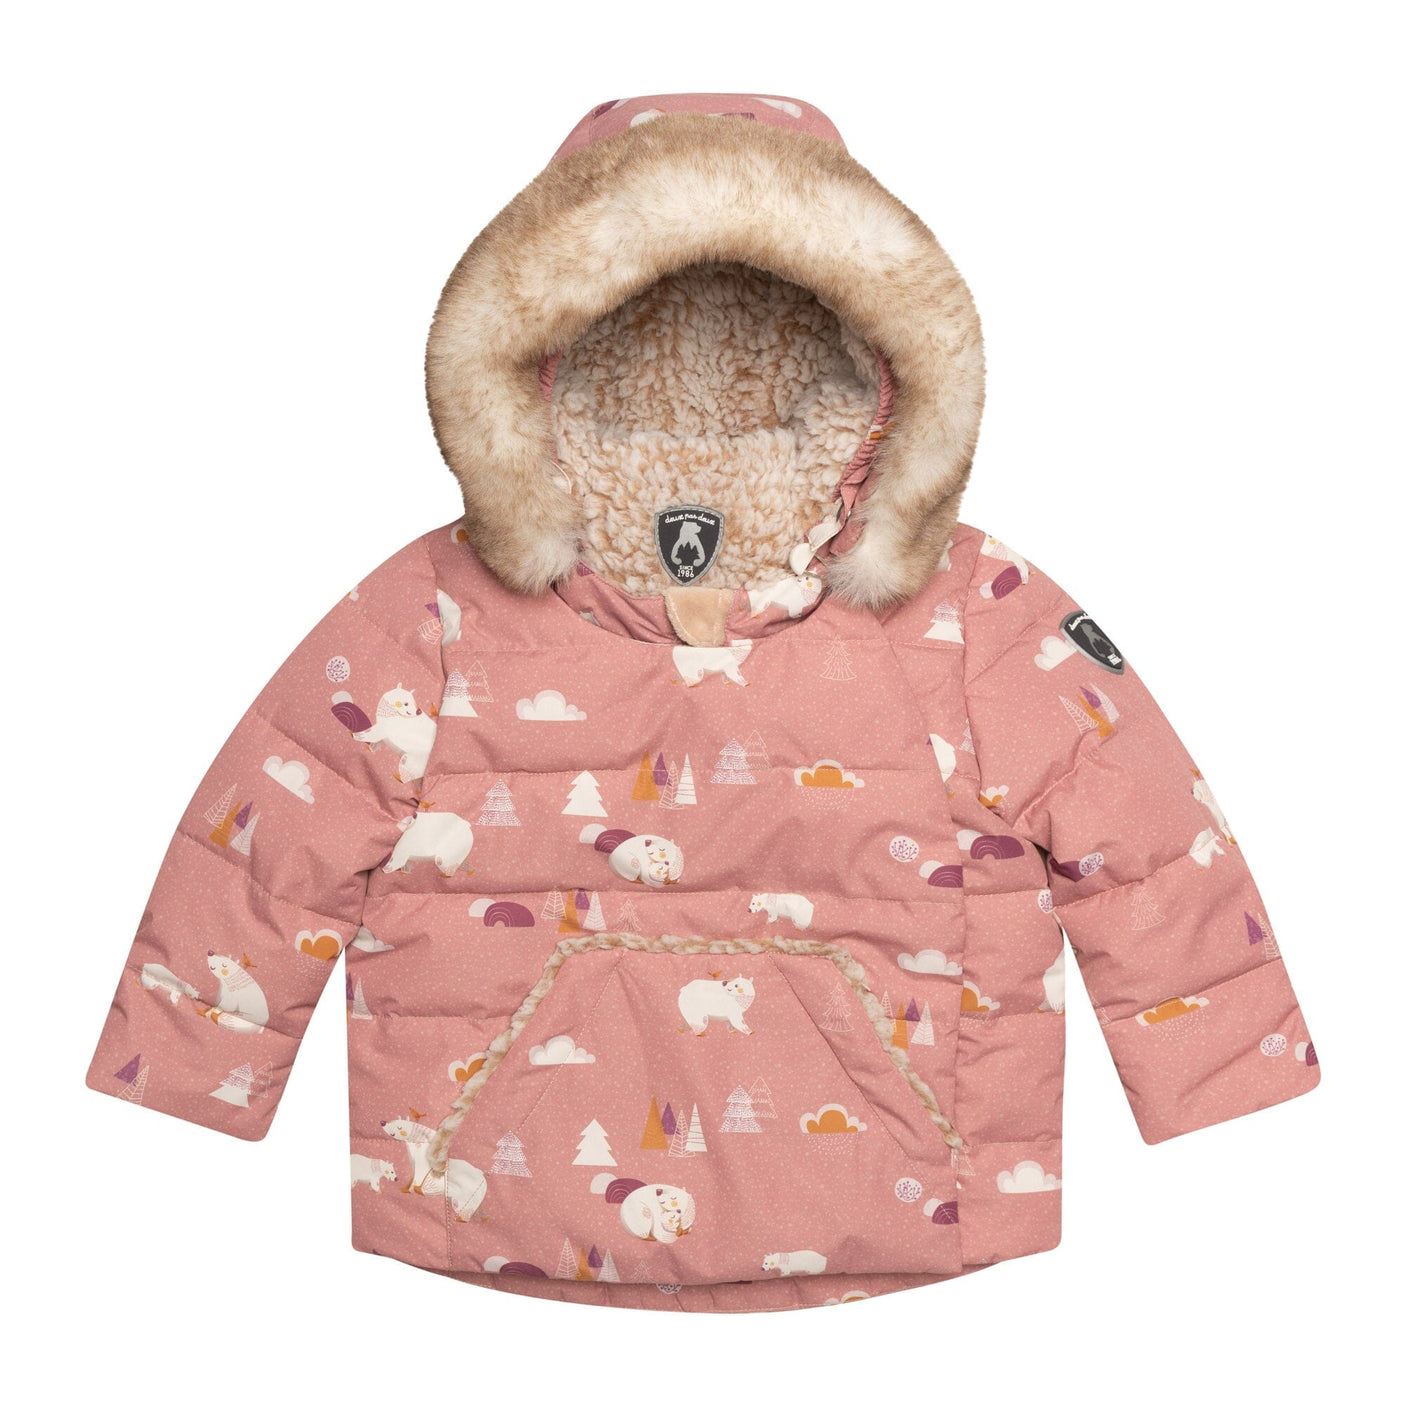 Two Piece Baby Snowsuit Ancient Rose With Bear Print-3